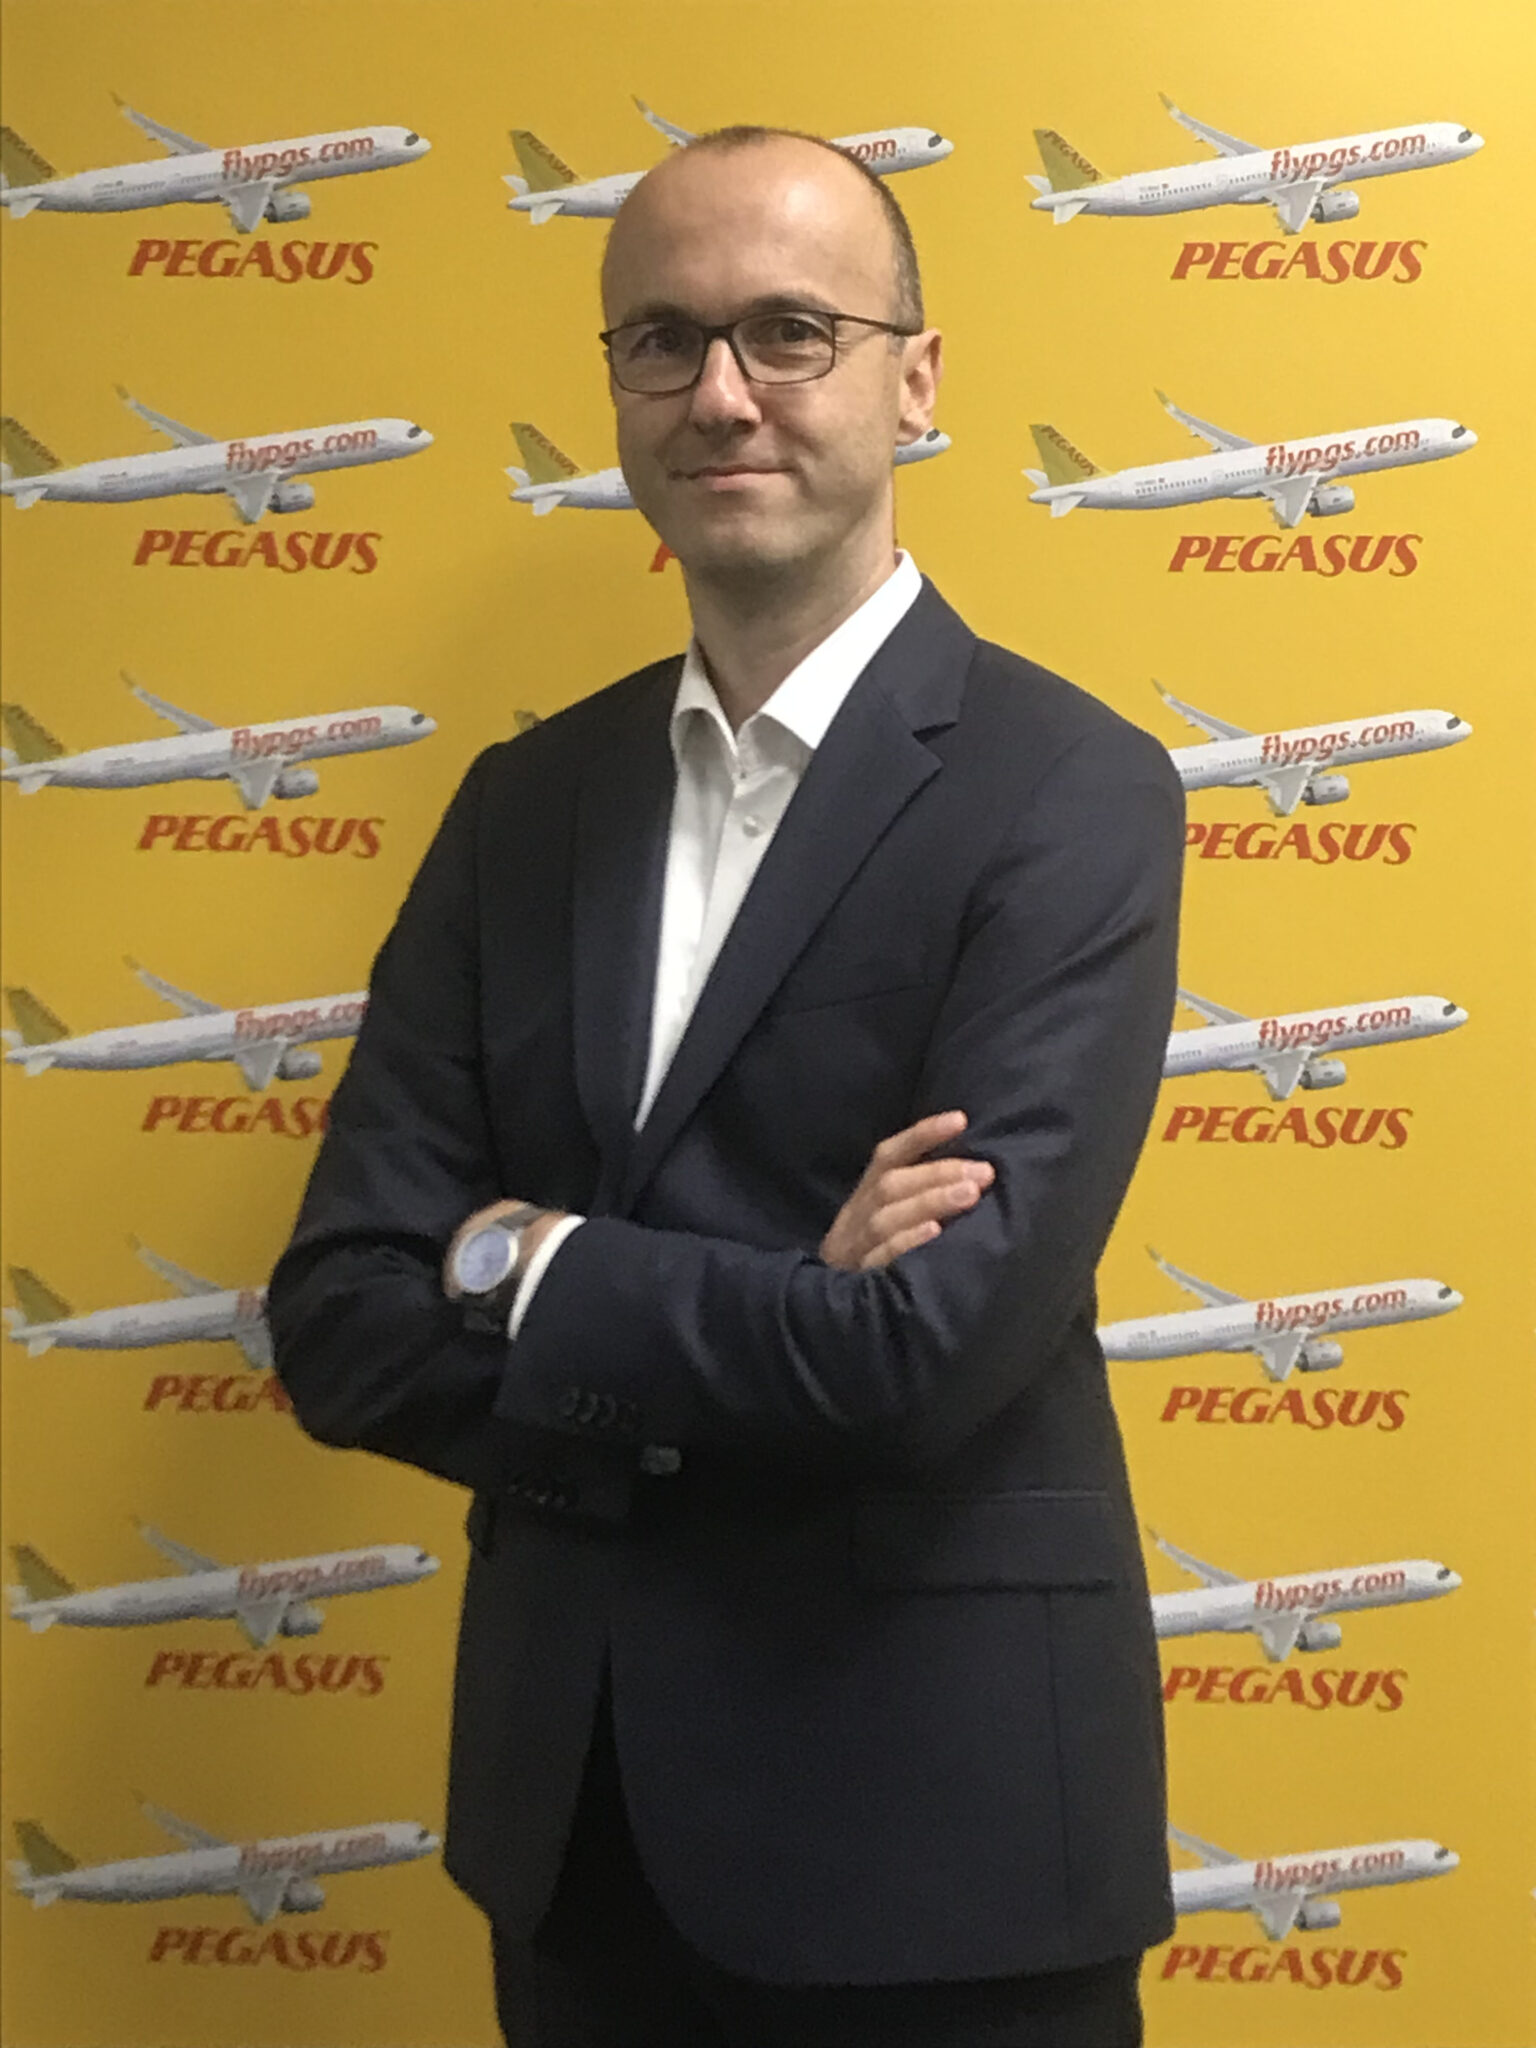 ahmet-bagdat-to-be-the-director-of-marketing-and-e-commerce-at-pegasus-airlines